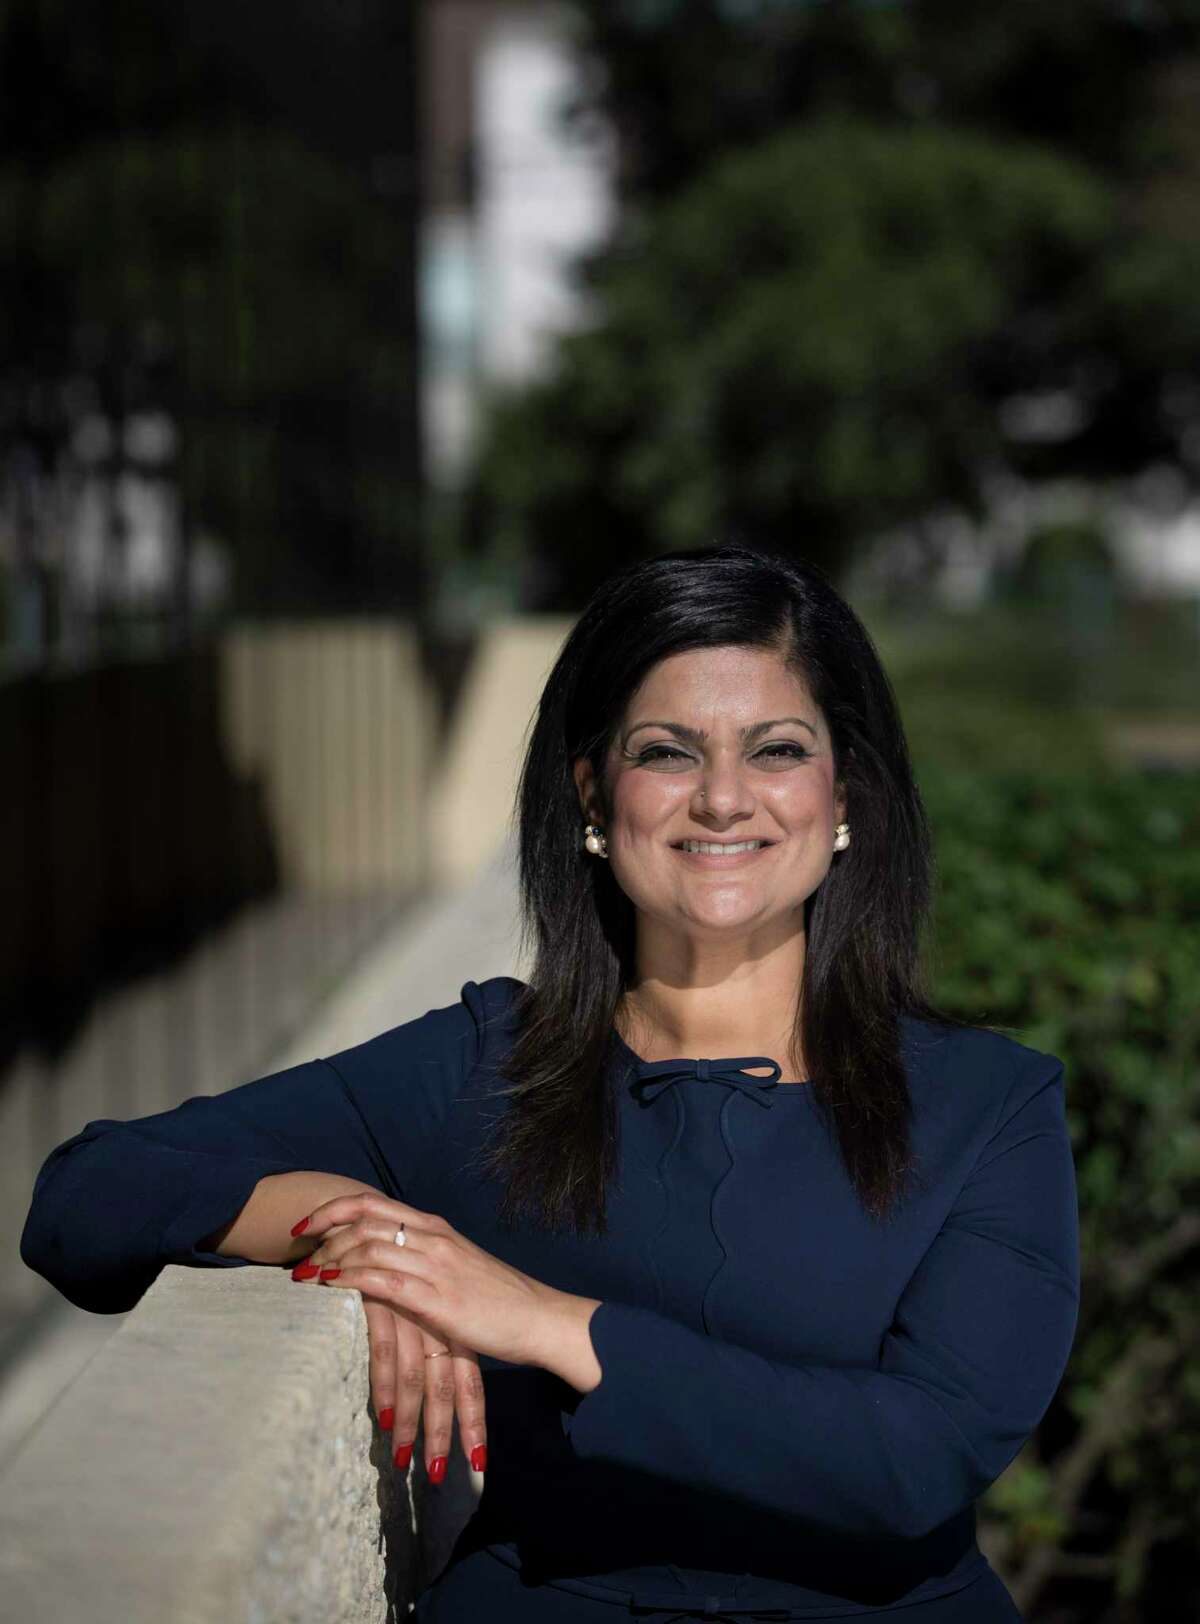 Illy Jaffer, government affairs for the Houston Health Department, poses for a photograph on Wednesday, Dec. 4, 2019, in Houston. Jafar is advocating for lyme disease awareness for Texas doctors after she was diagnosed years after a tick bite.